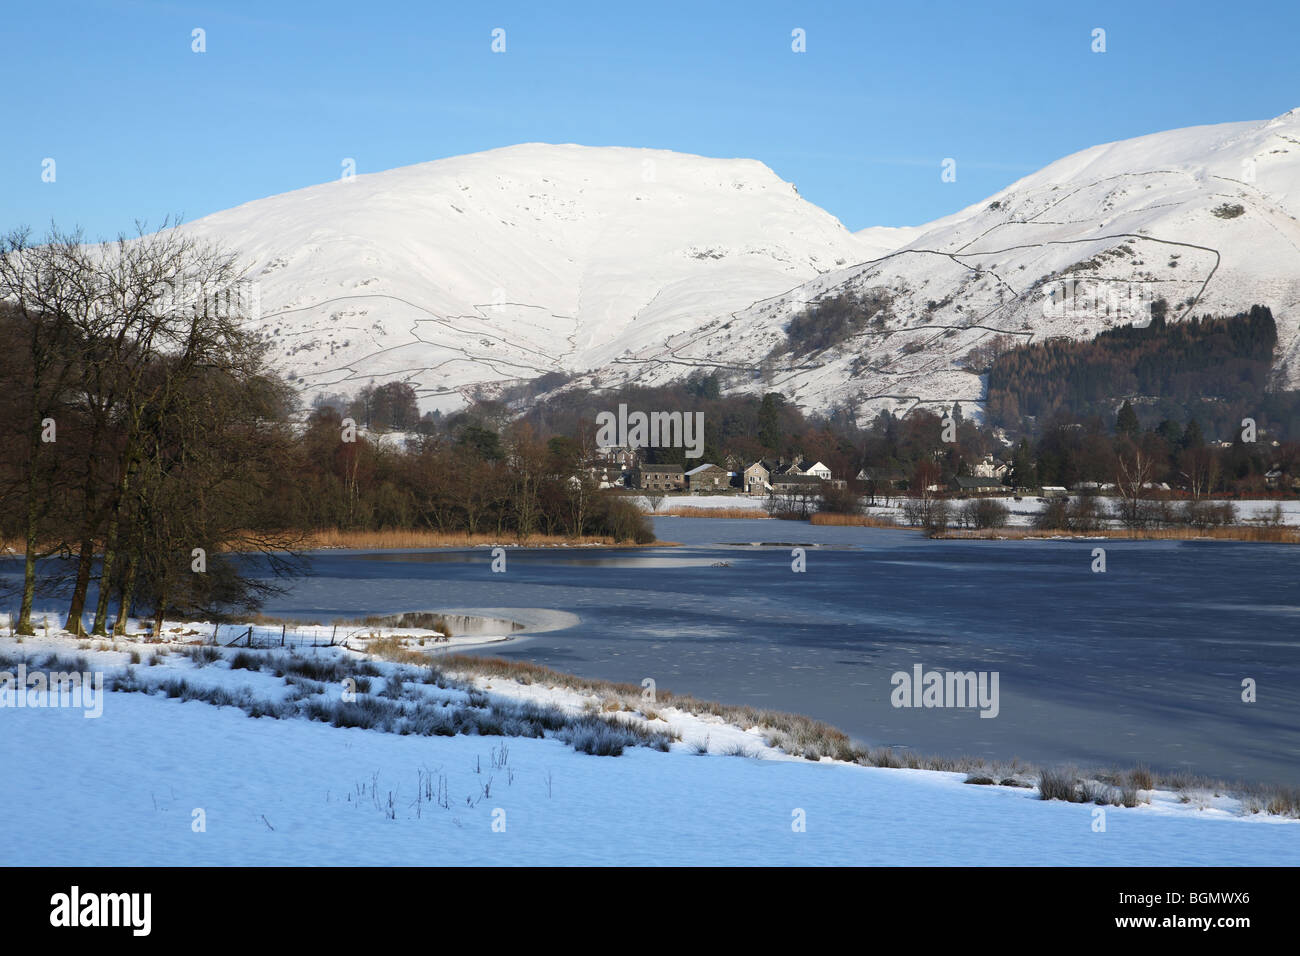 Grasmere with snow clad mountains reflected in the lake, Cumbria, UK Stock Photo